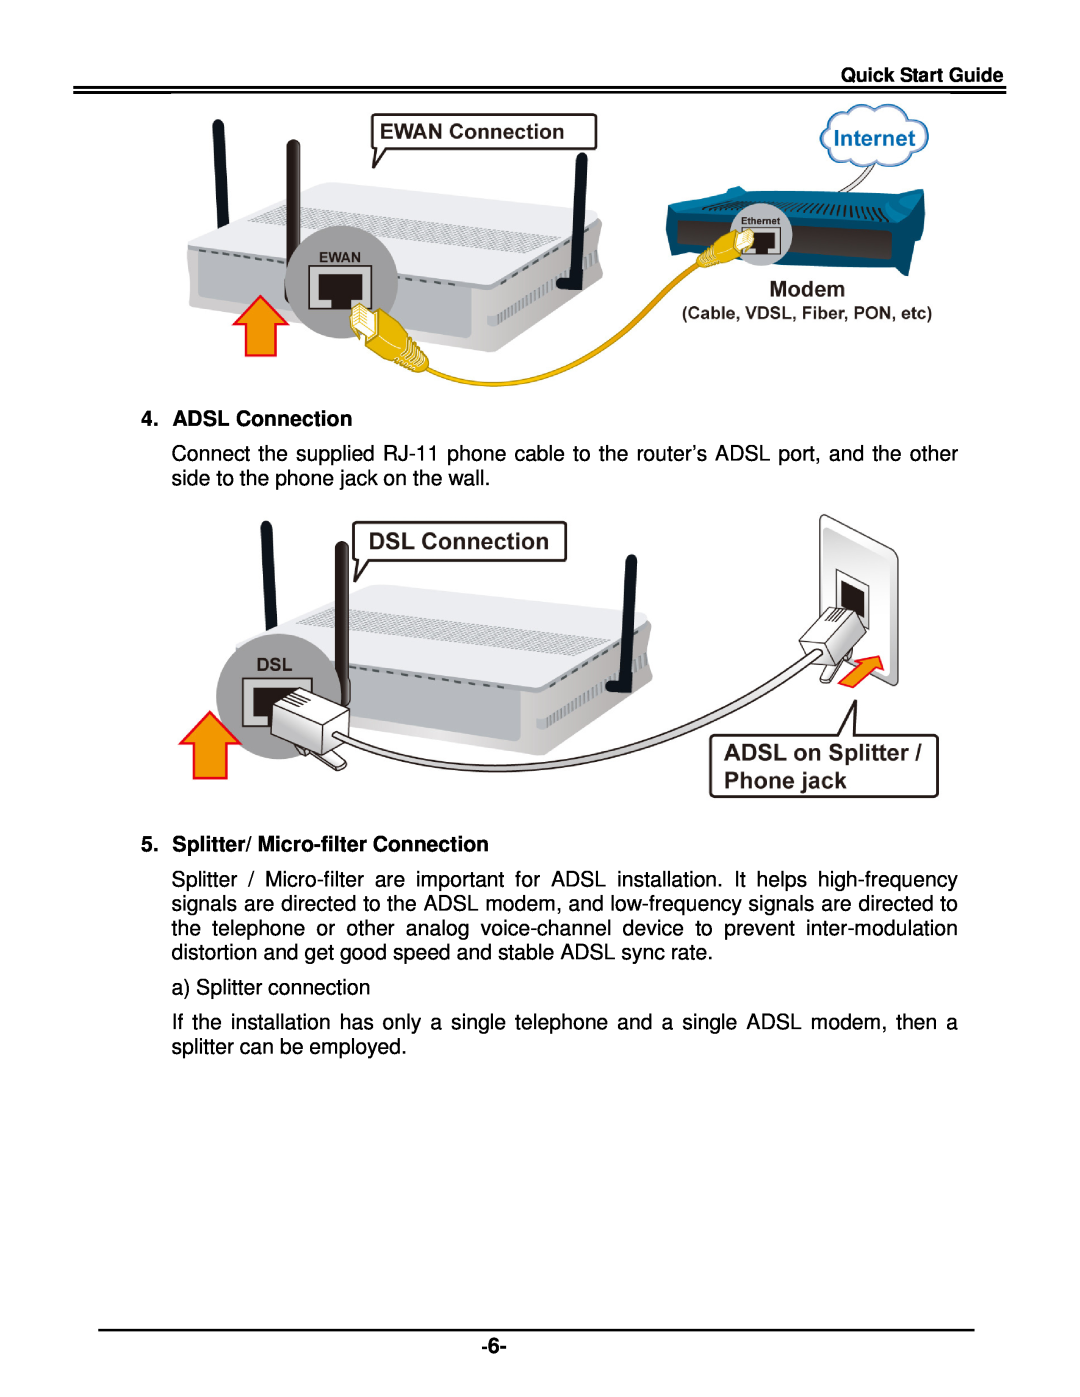 Billion Electric Company BEC 7800(N) quick start ADSL Connection, Splitter/ Micro-filter Connection 